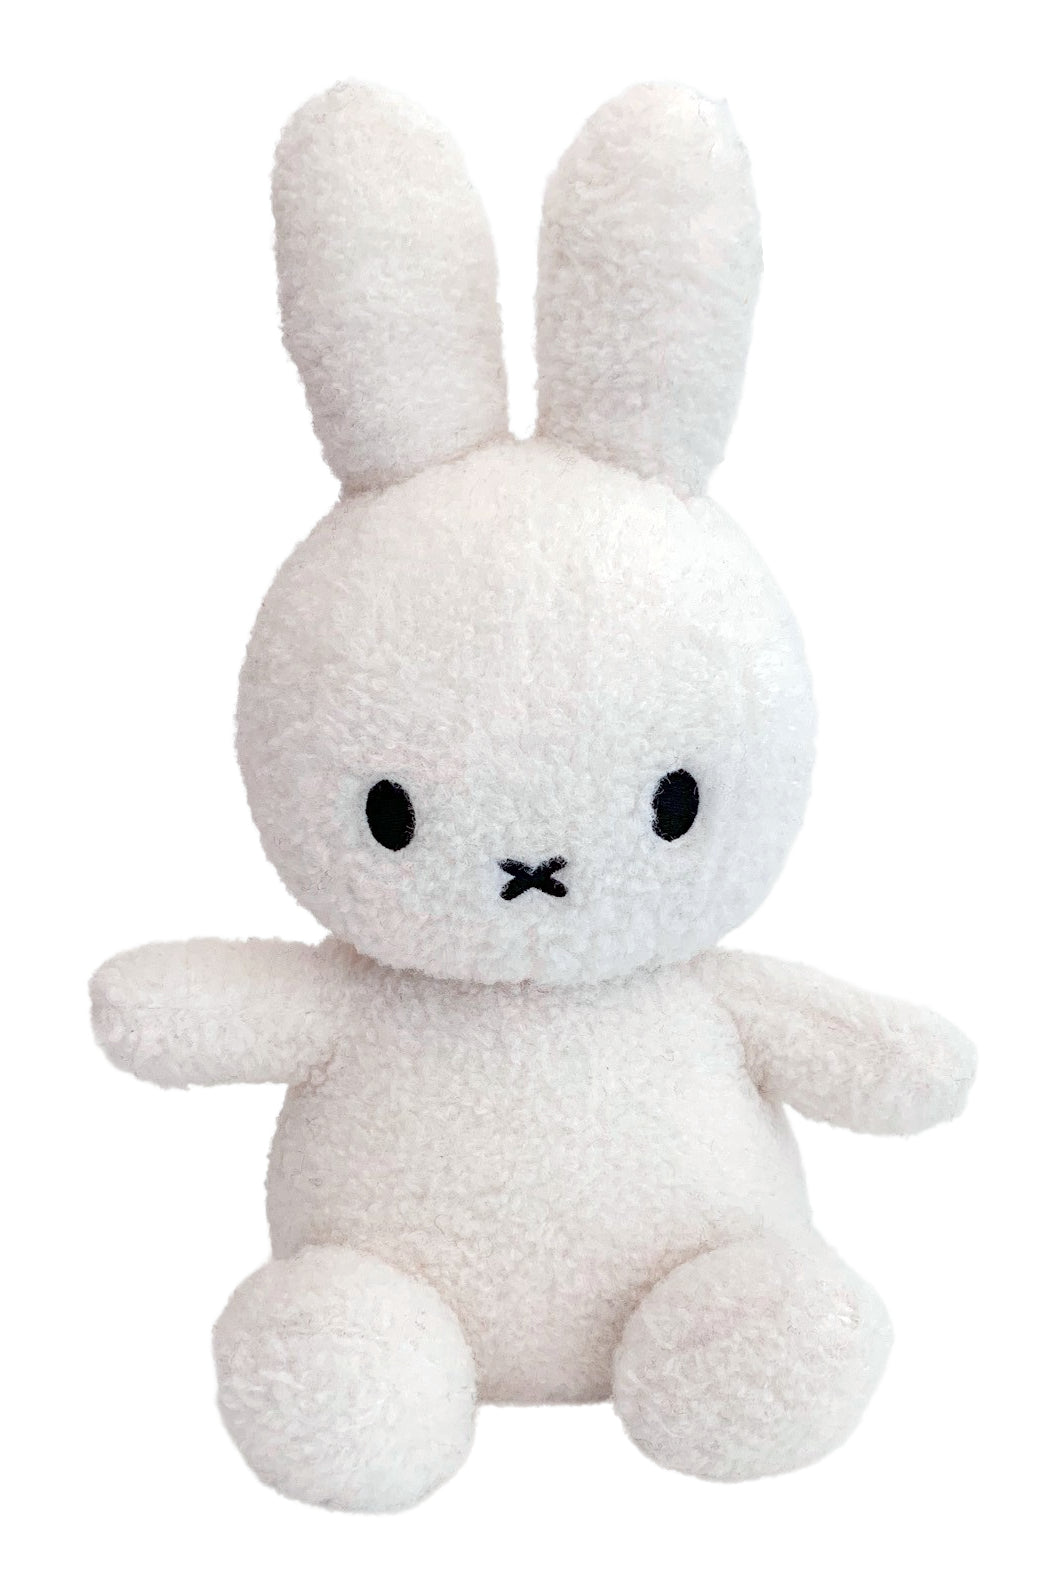 Front view of cream teddy Miffy the rabbit